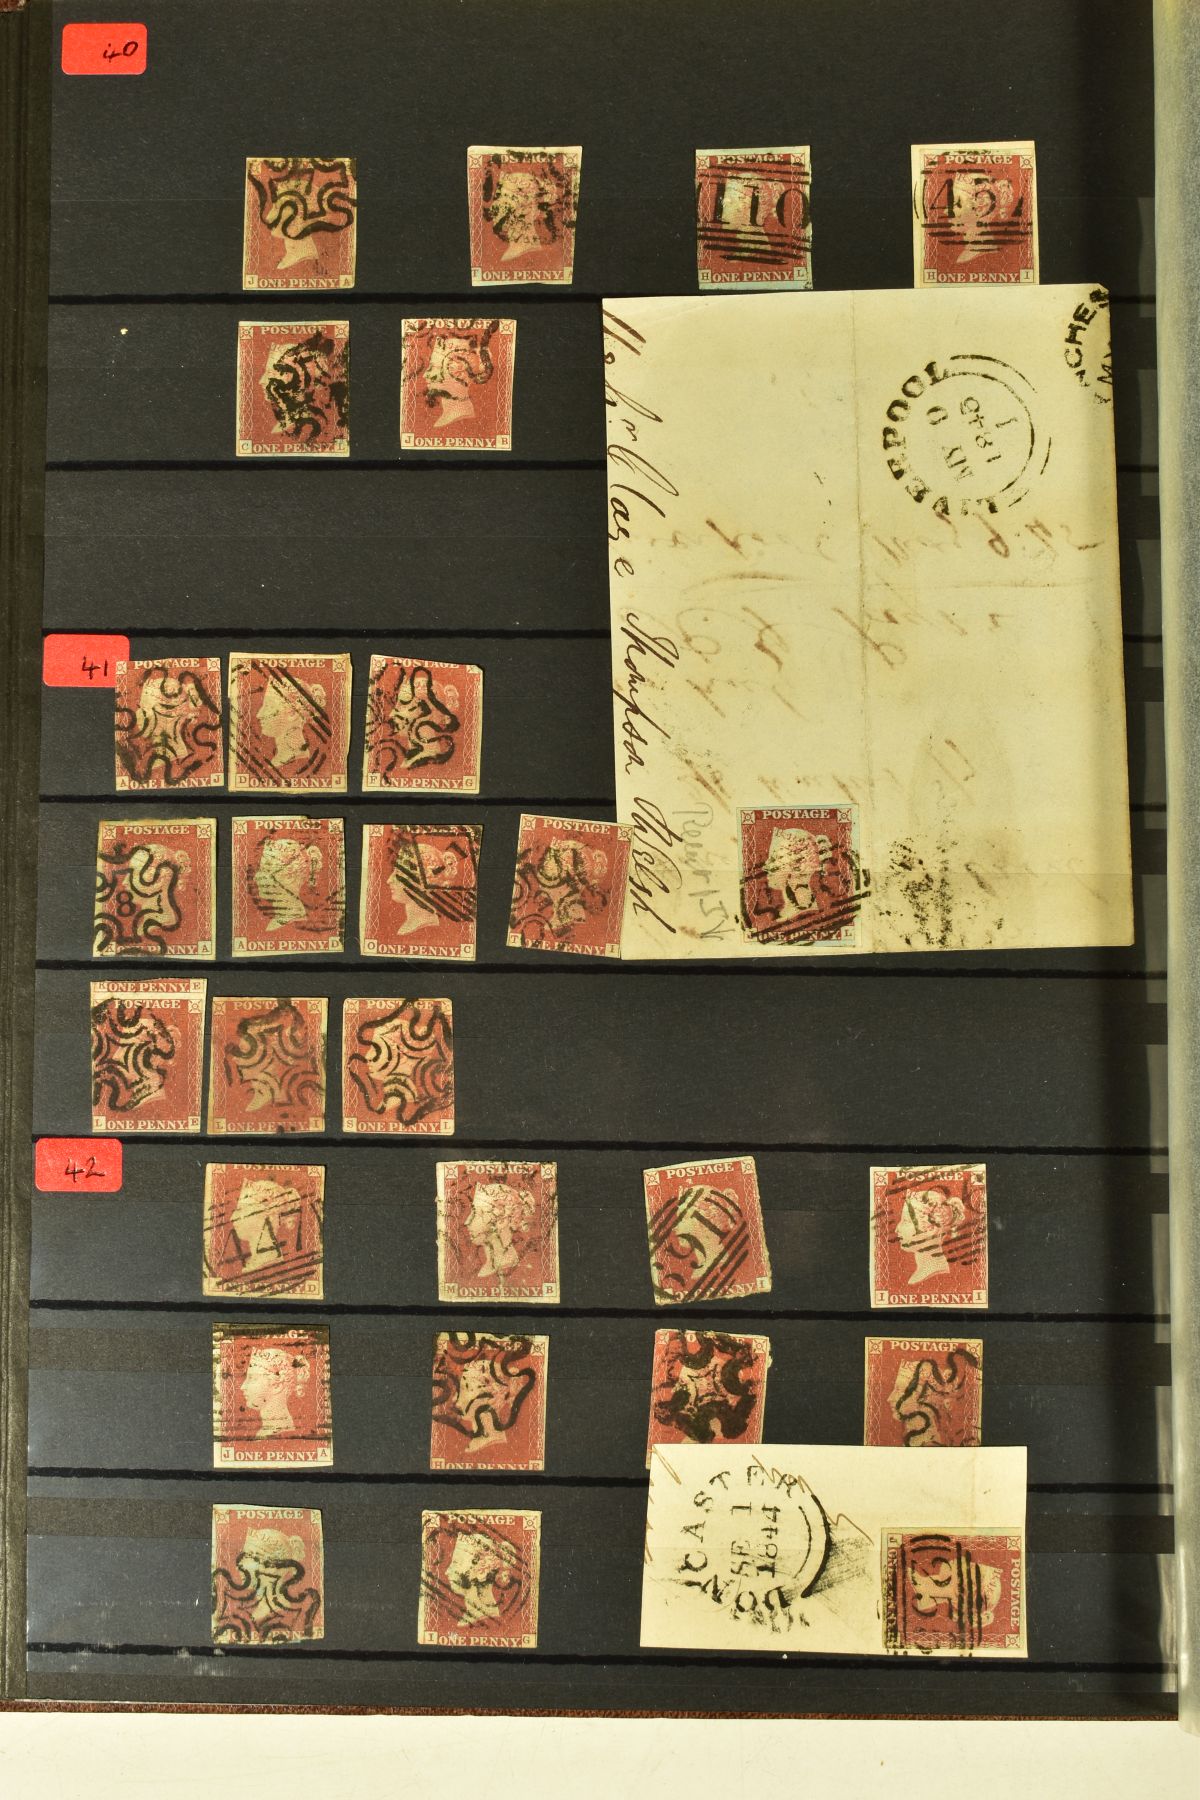 A LARGE BOX OF STAMPS in 19 albums includes GB QV to QEII collections, Commonwealth fiscals/ - Image 16 of 17